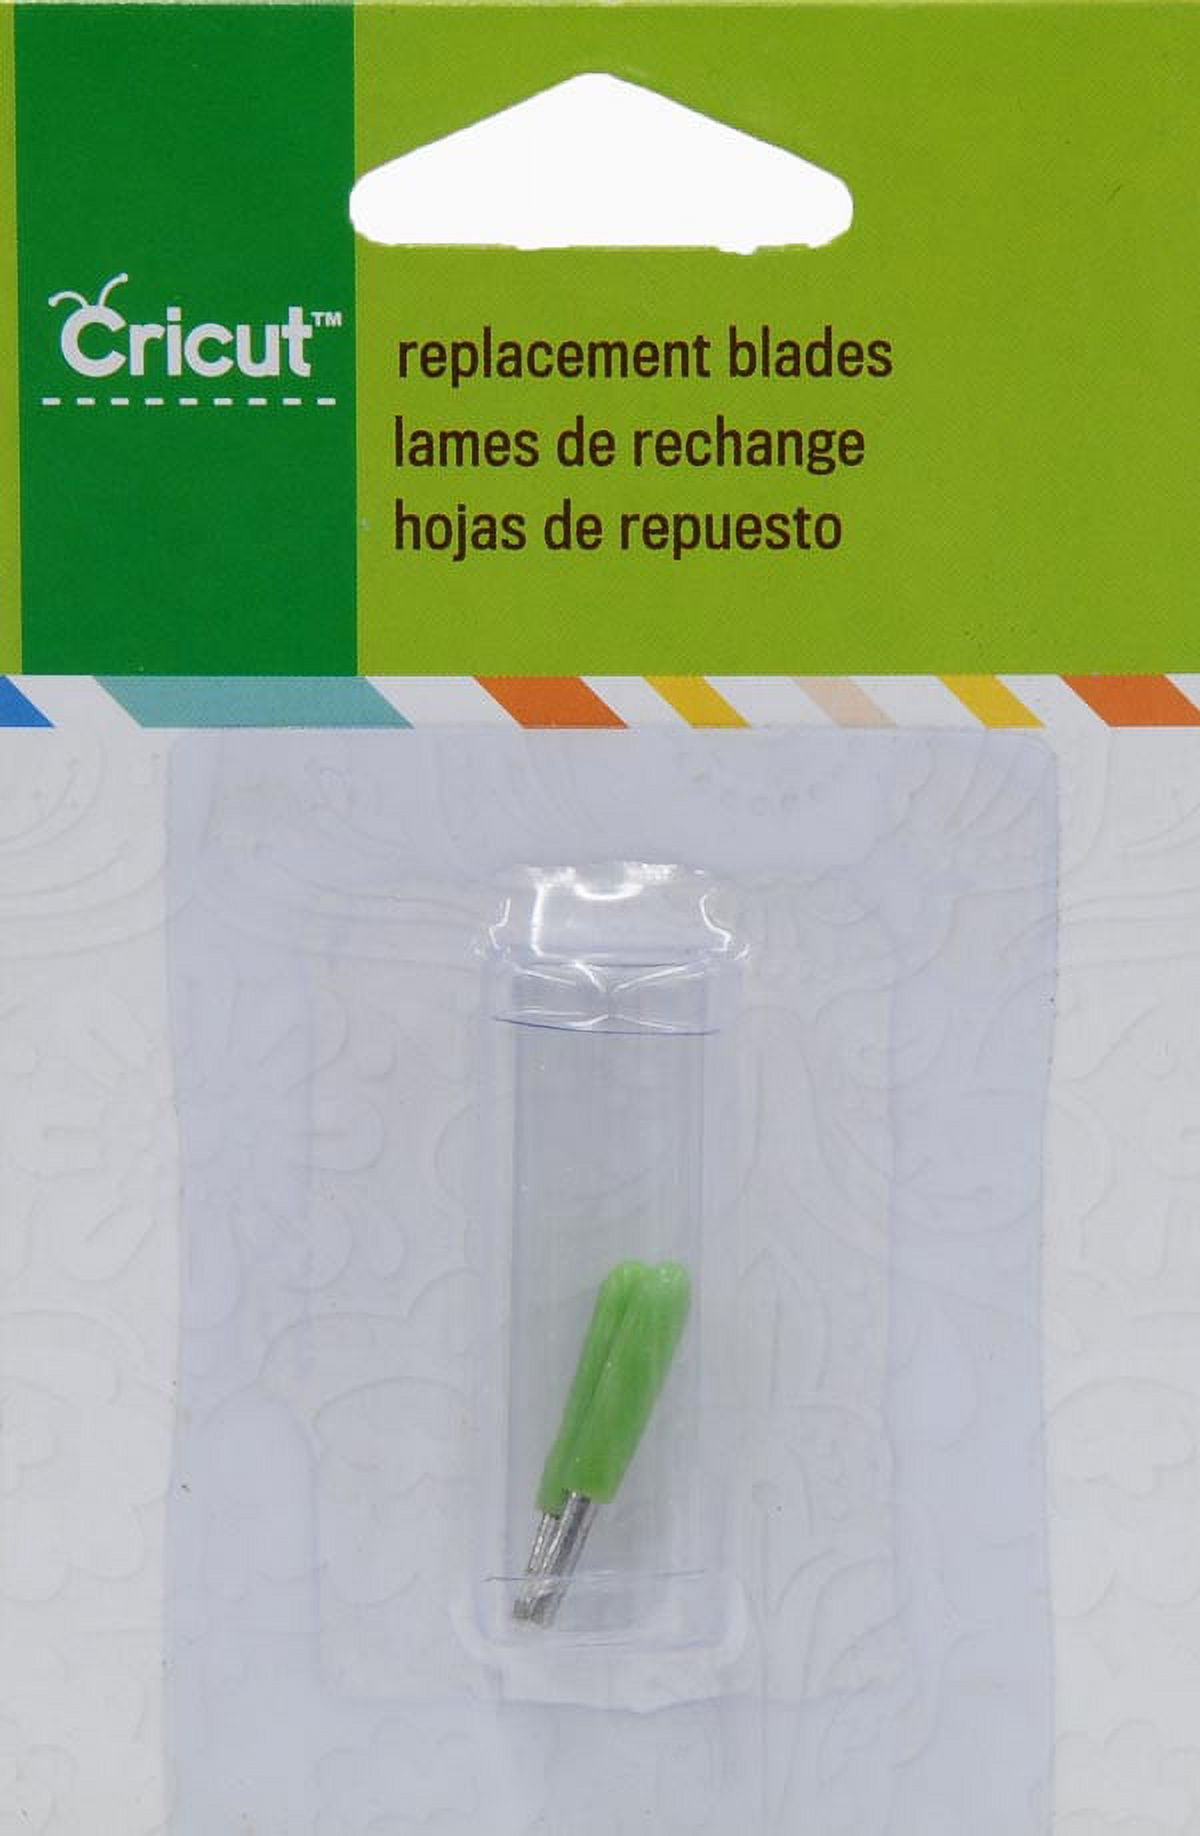 Cricut 29-0002 Replacement Blades for Cutting Machines for sale online